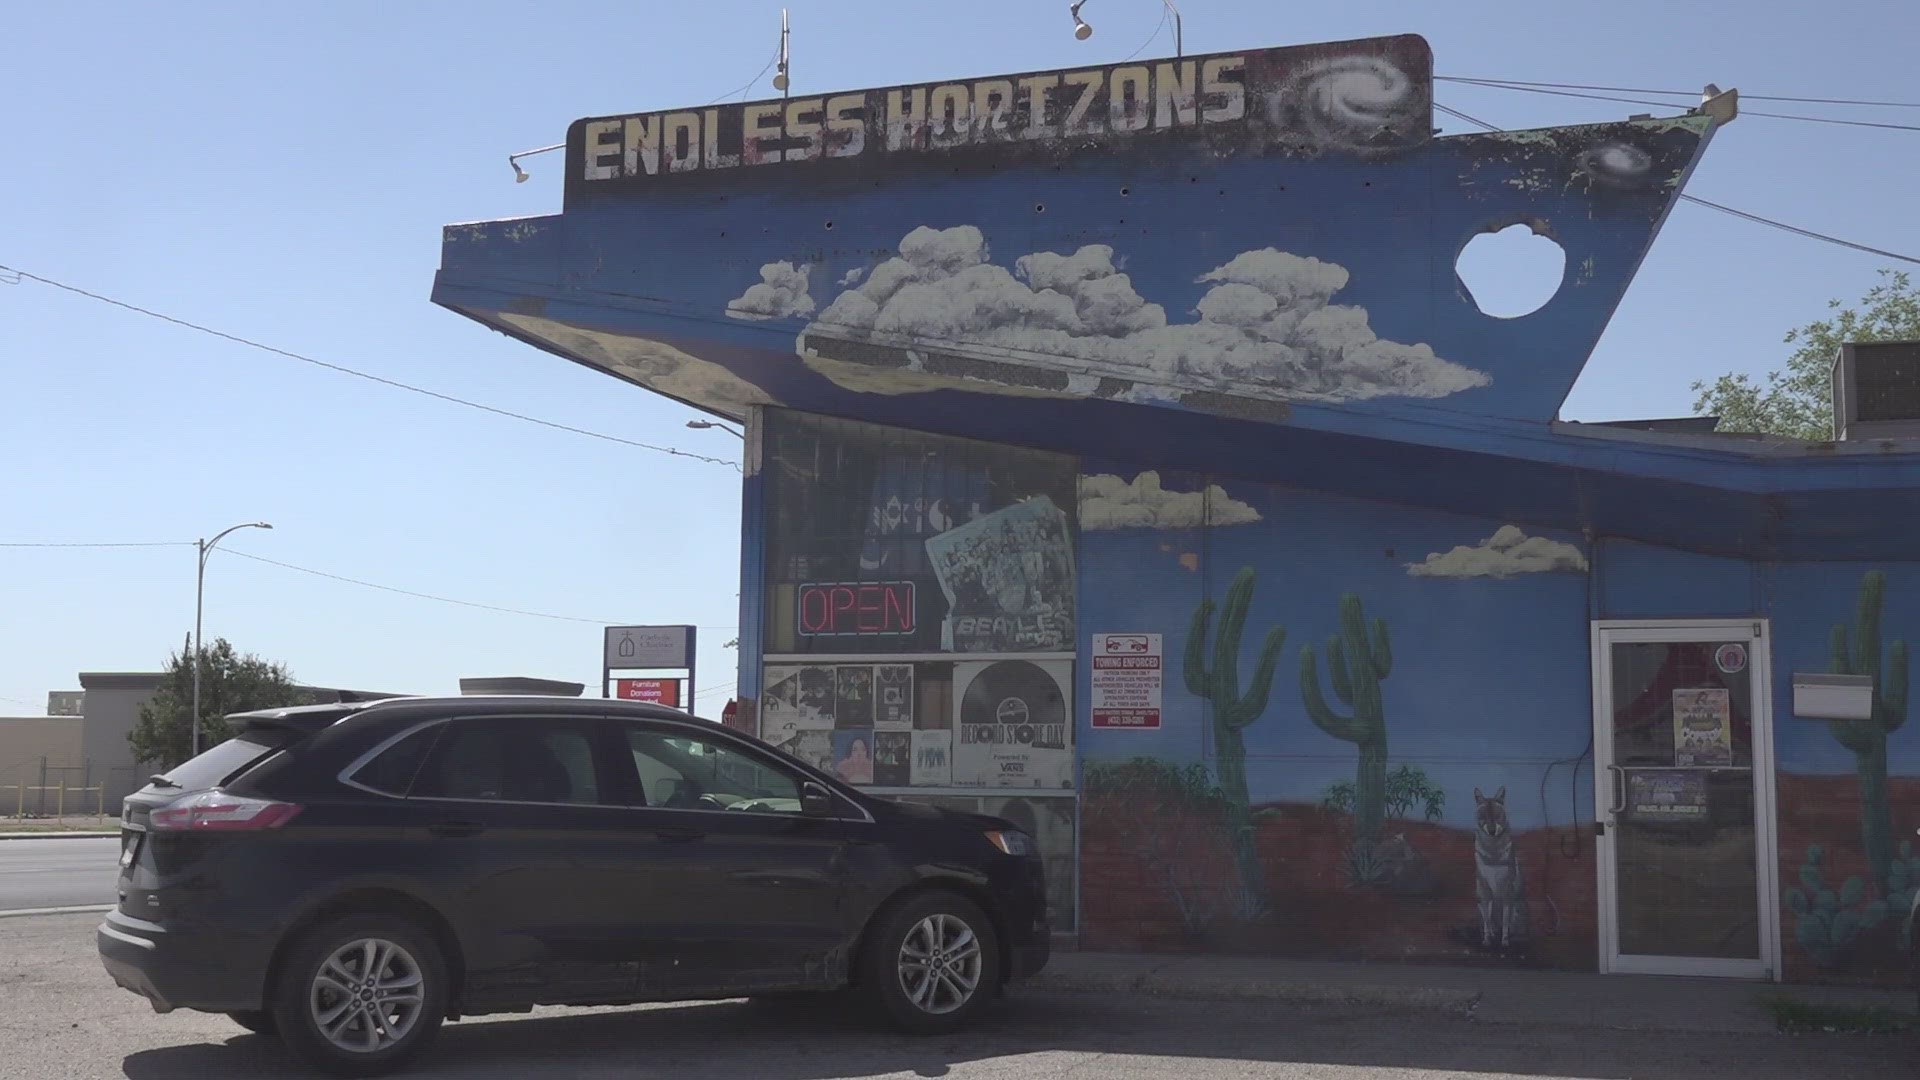 Local record shop Endless Horizons could be closing their doors soon.